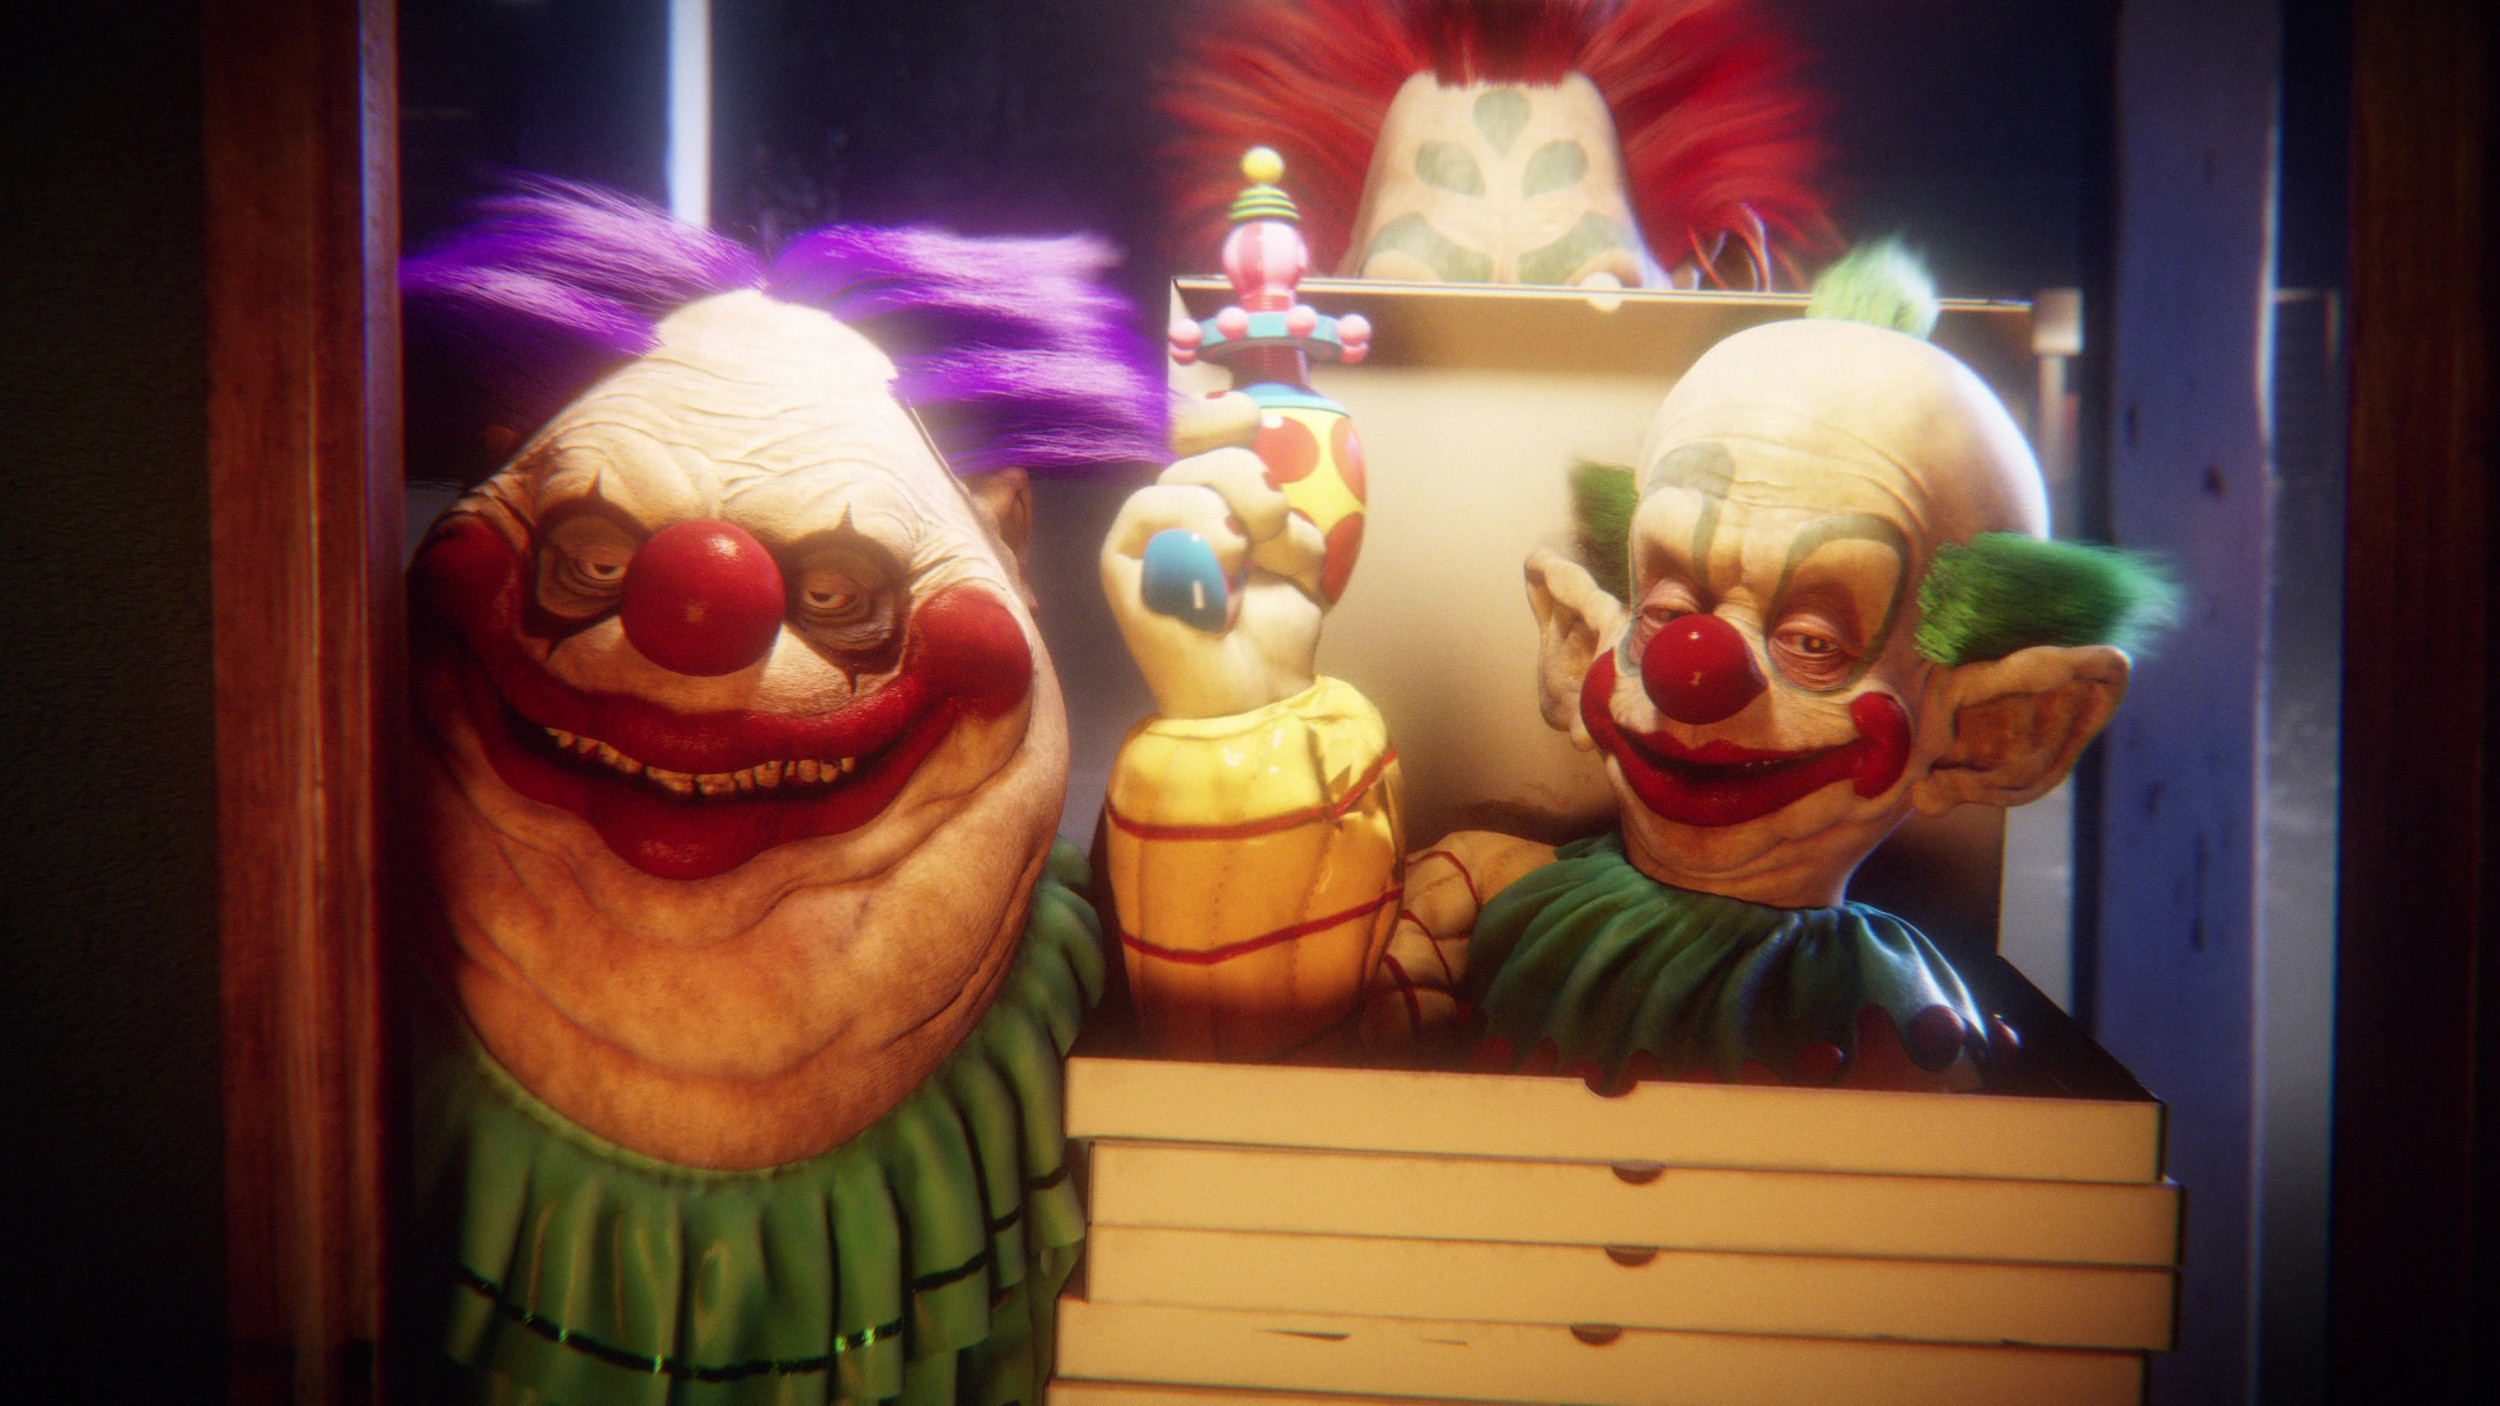 Xbox Series X & S Killer Klowns from Outer Space : The Game